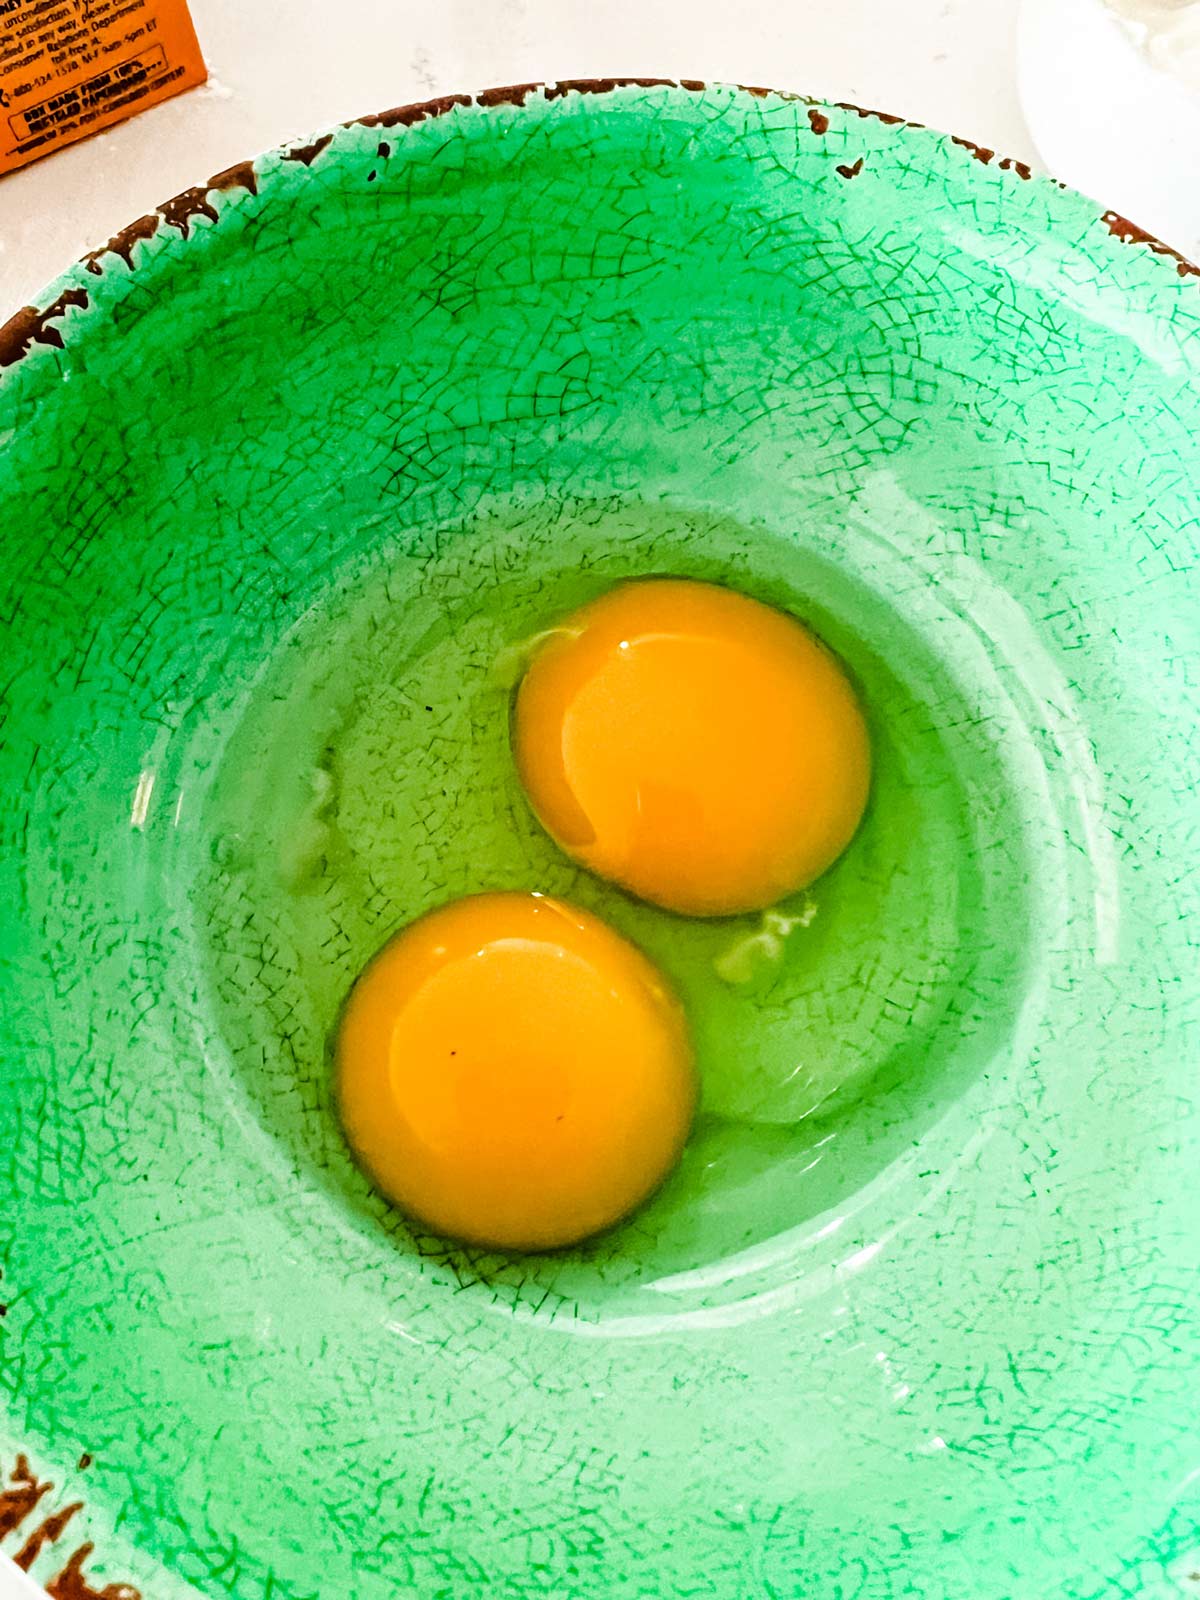 An egg yolk and egg in a bowl.